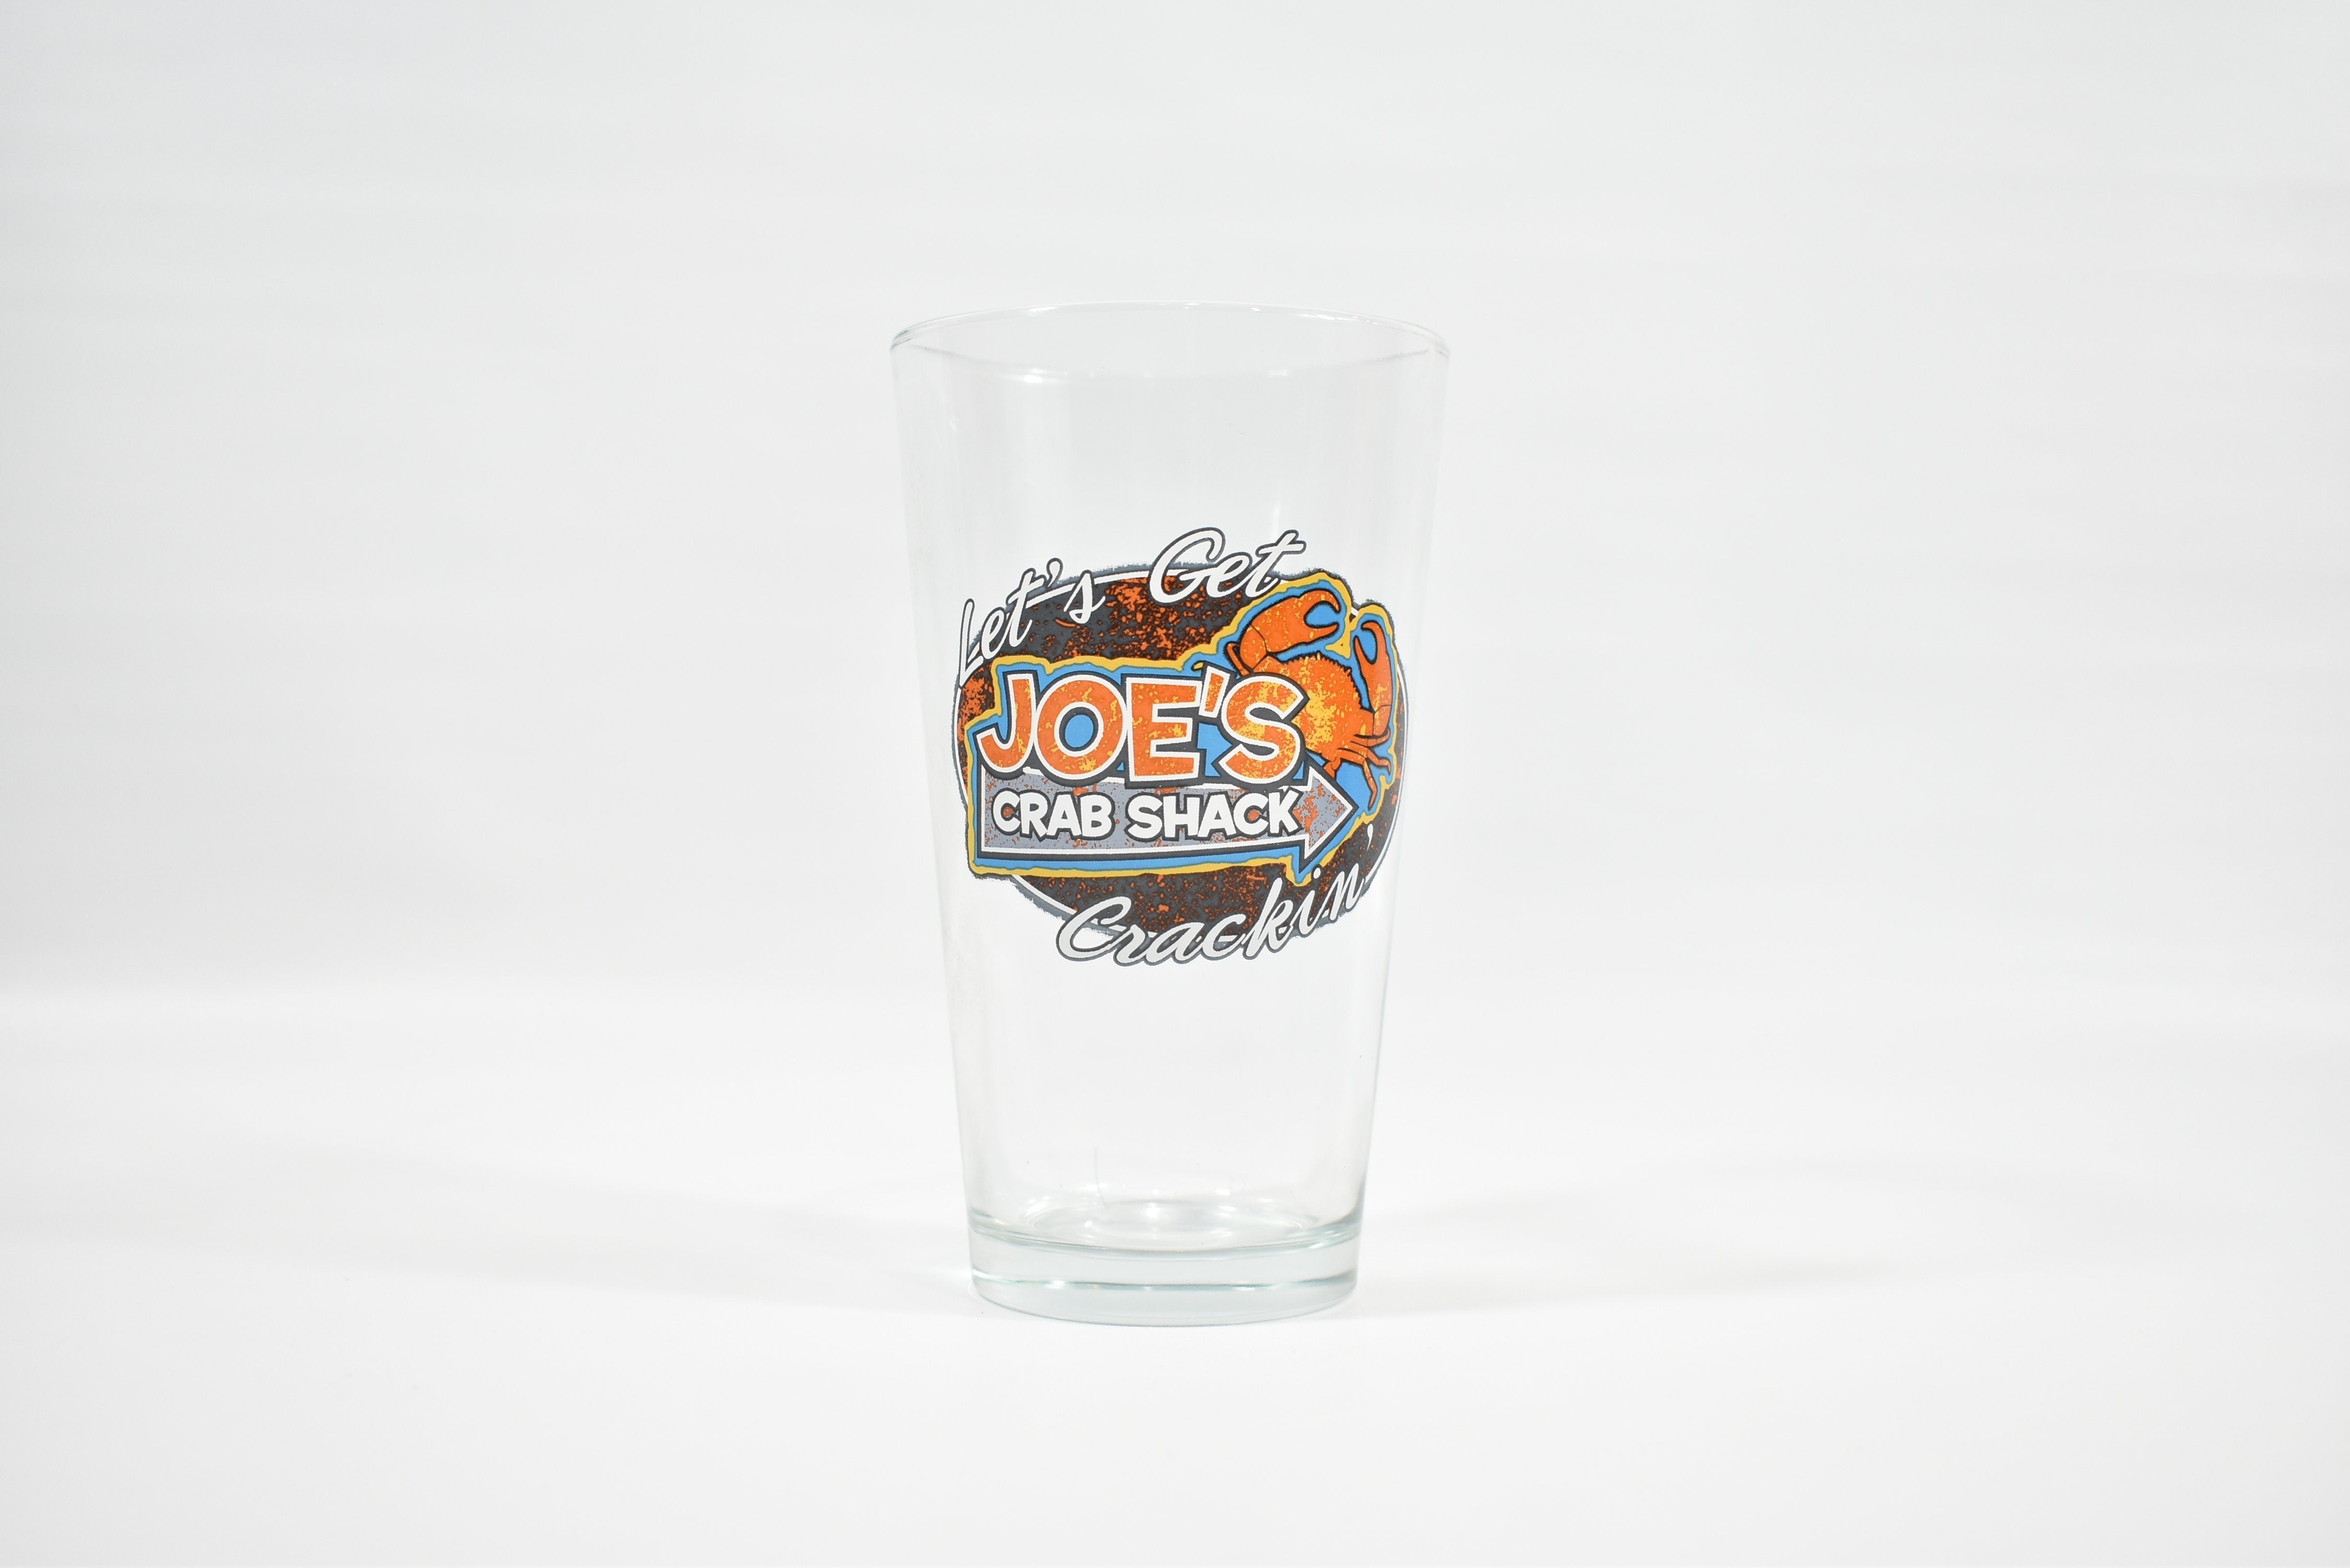 Lets Get Joes Crab Shack Crackin Glass Beer Mug Collectible glass cup